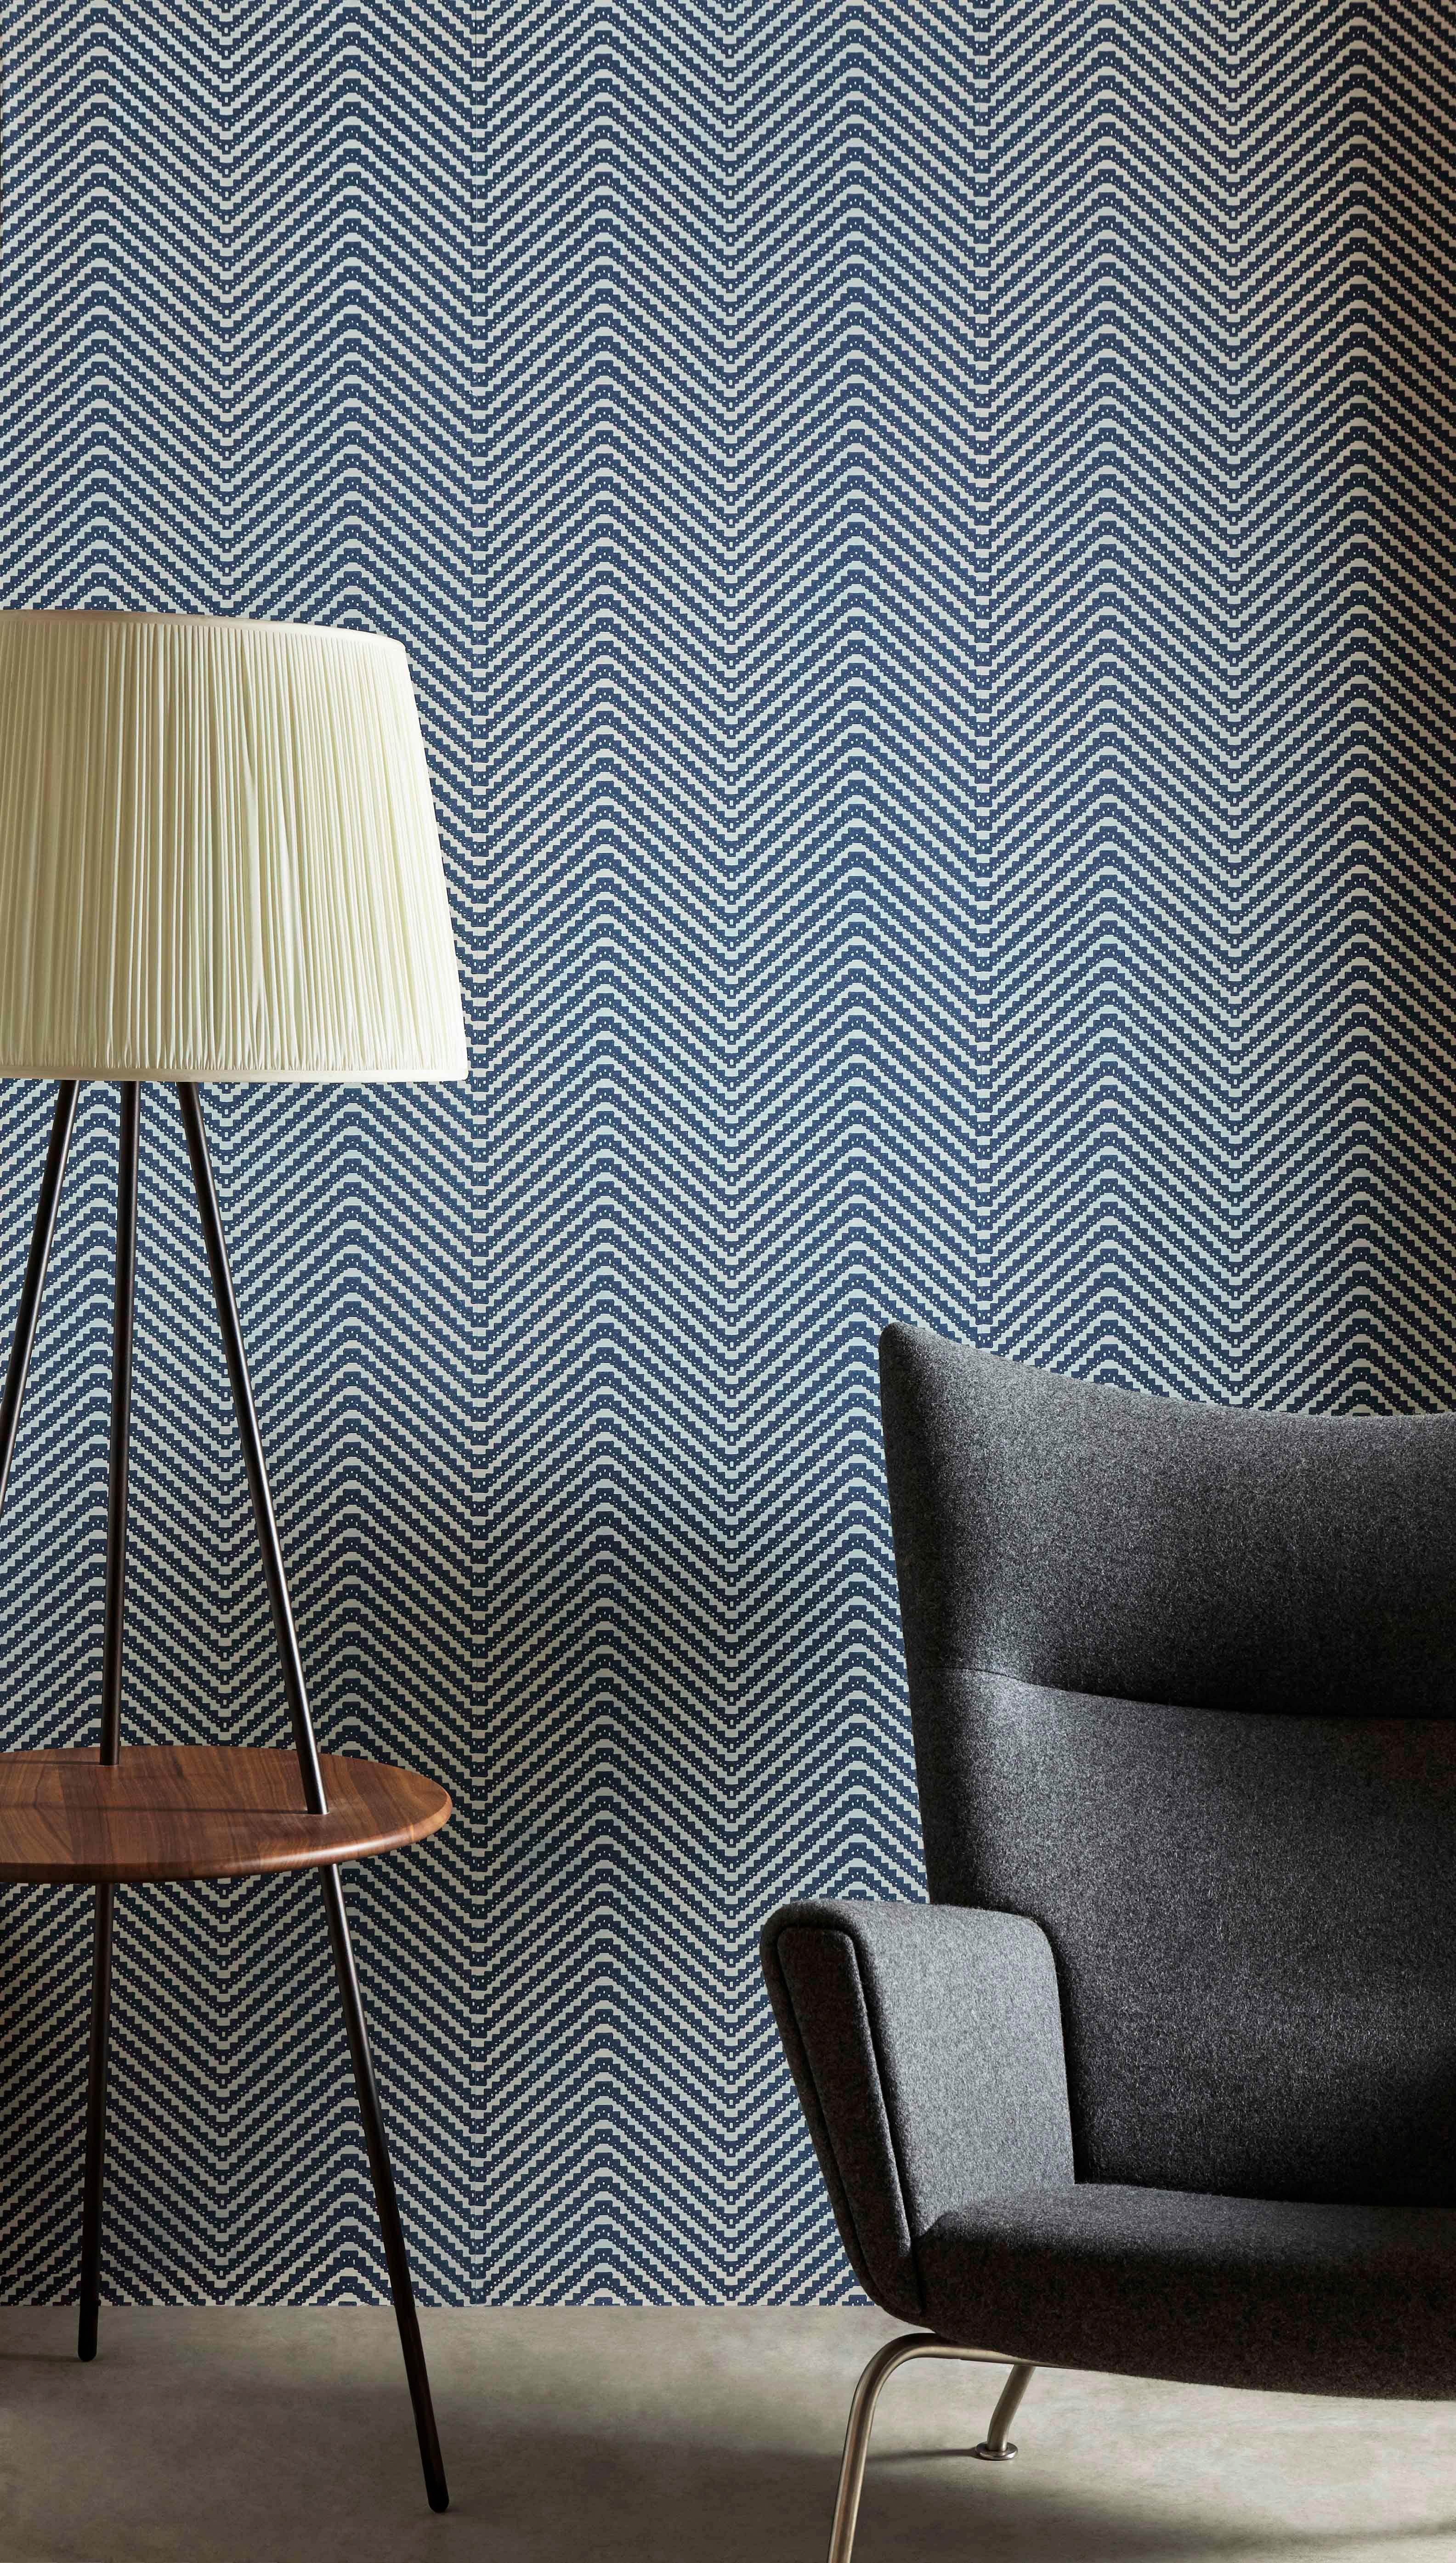 Color: Ink Blue (also available in Grey)
Trim width: 52cm/20.5 inches
Roll Length: 10m
Pattern Repeat: Straight
Match Length: 2.5cm / 1 inch.

Please get in contact to order a sample.

Chevron tricks the eye with a visually textural print, inspired